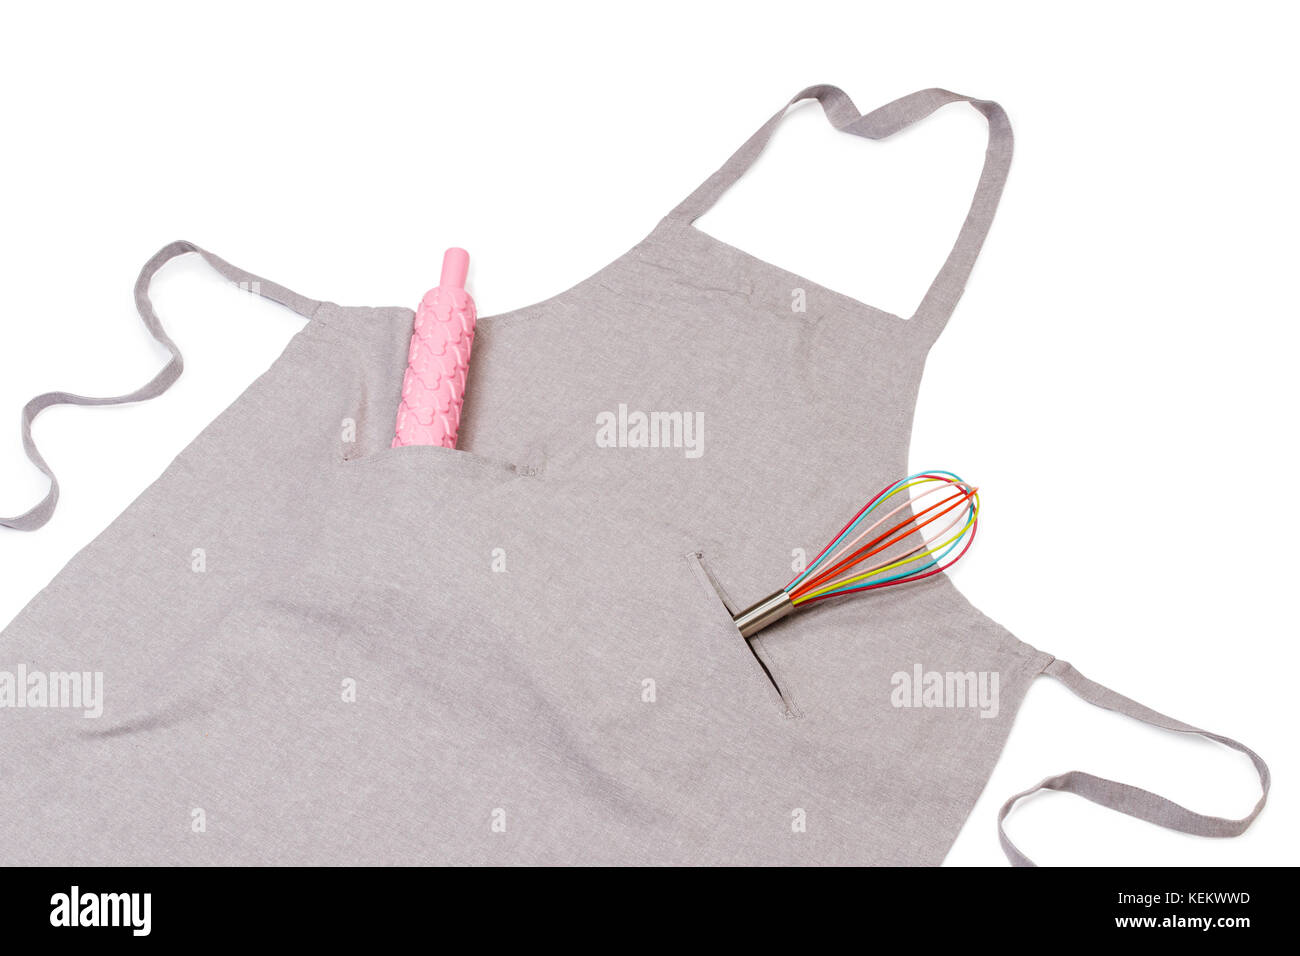 Apron with rolling pin and whisk Stock Photo